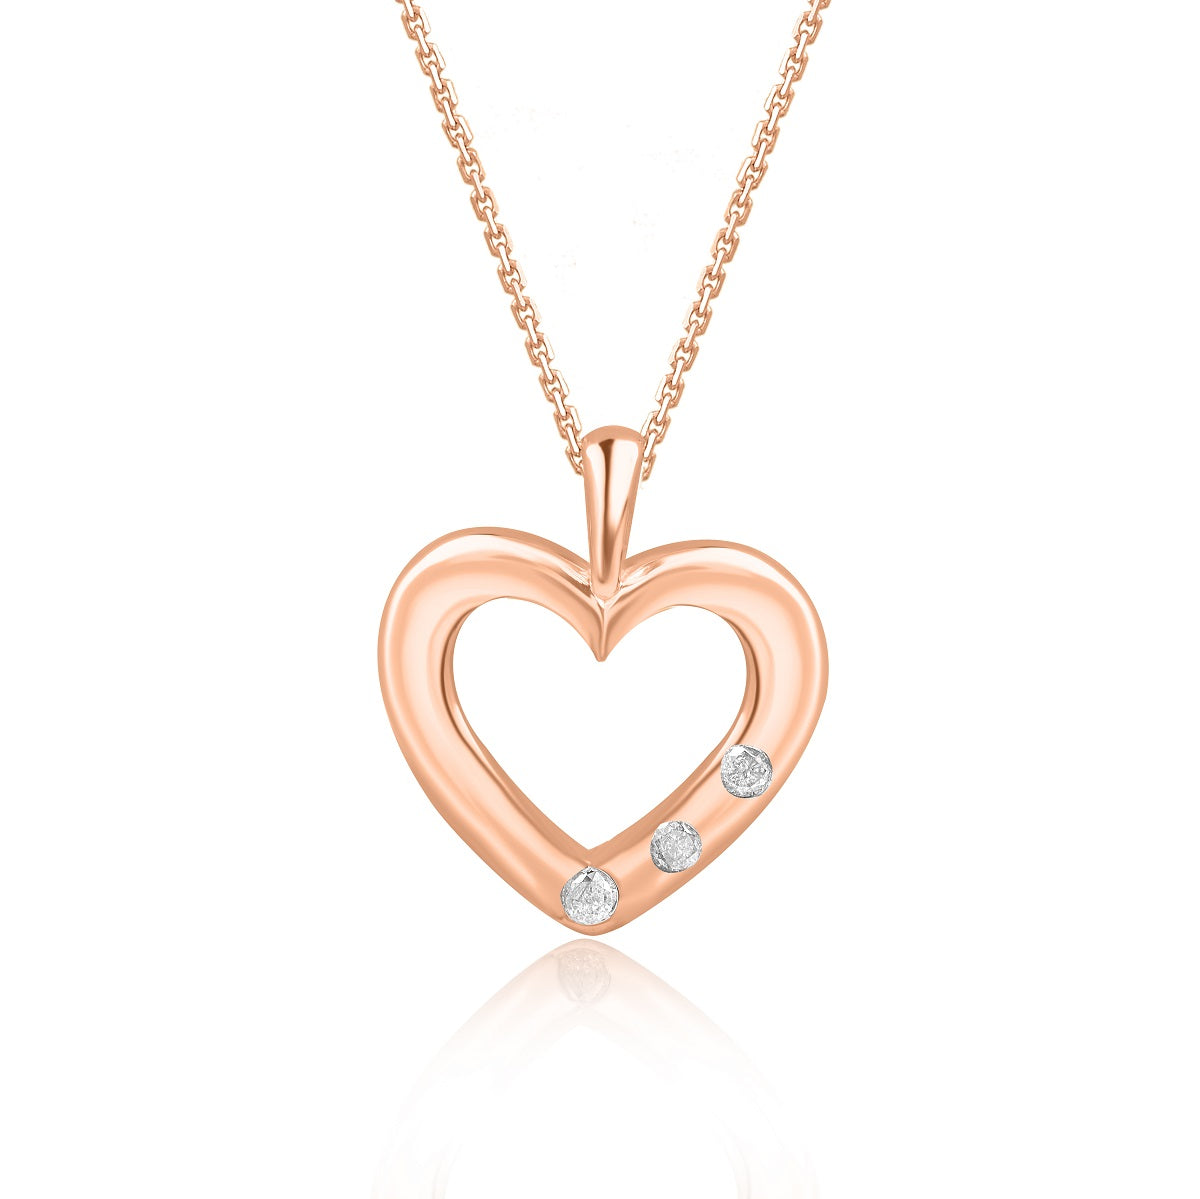 Designer Heart Shaped Pendant Necklace in Gold Plated 925 Sterling Silver